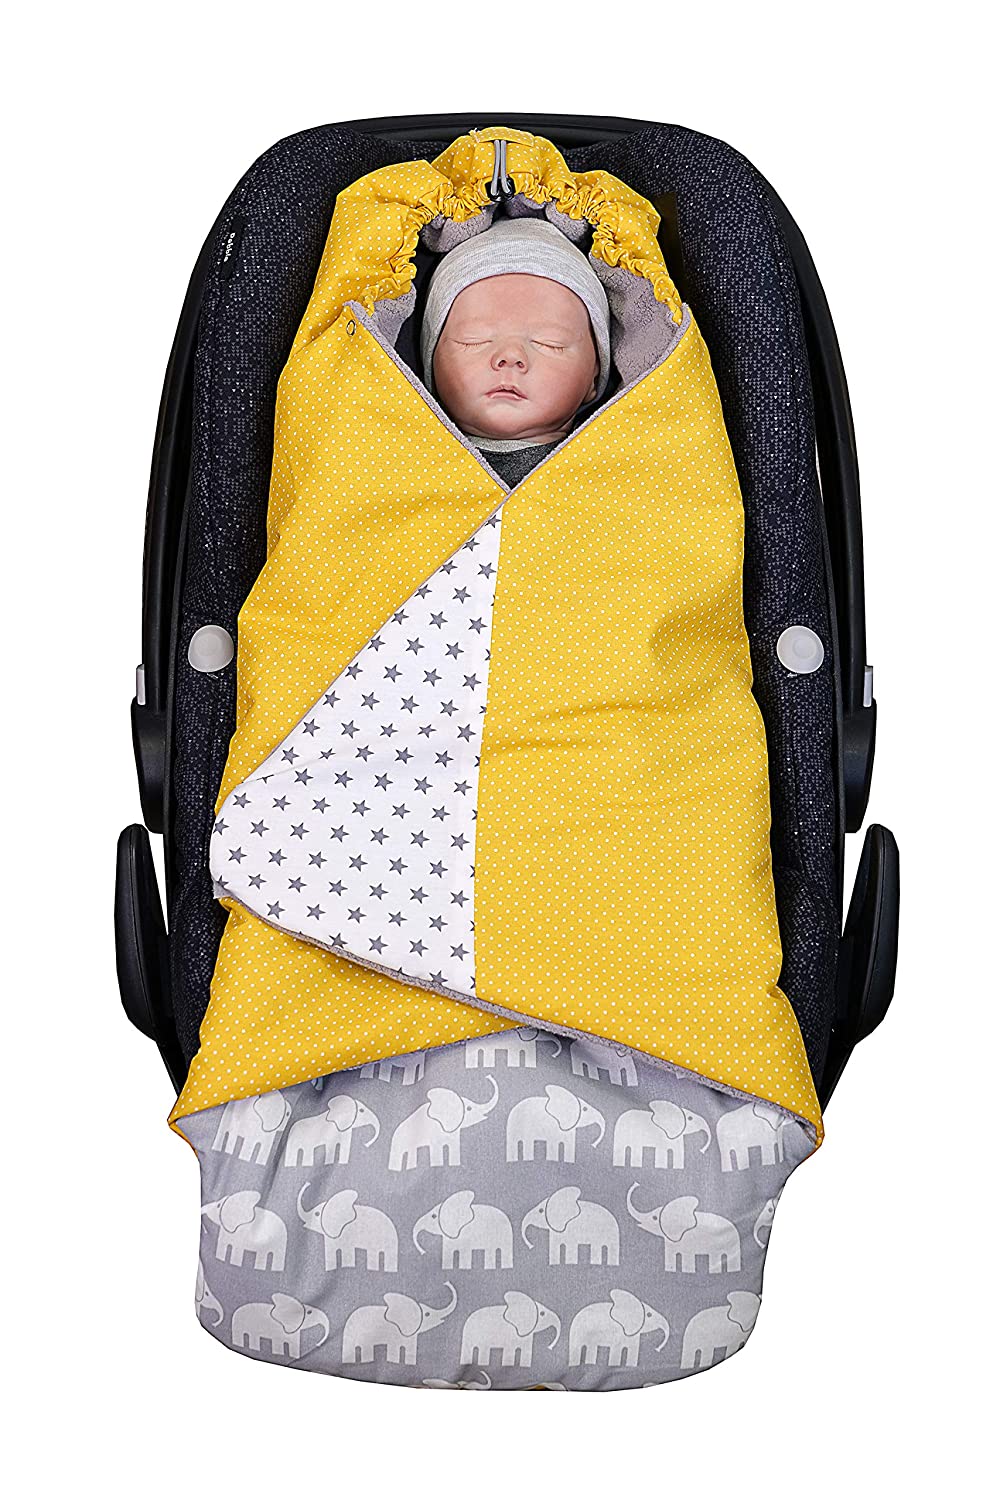 ULLENBOOM ® Baby Swaddling Blanket Summer Elephant Yellow (Made in EU) – Blanket for Baby Car Seat & Prams, Compatible with Maxi Cosi® Car Seat, Ideal for 0 to 9 Months